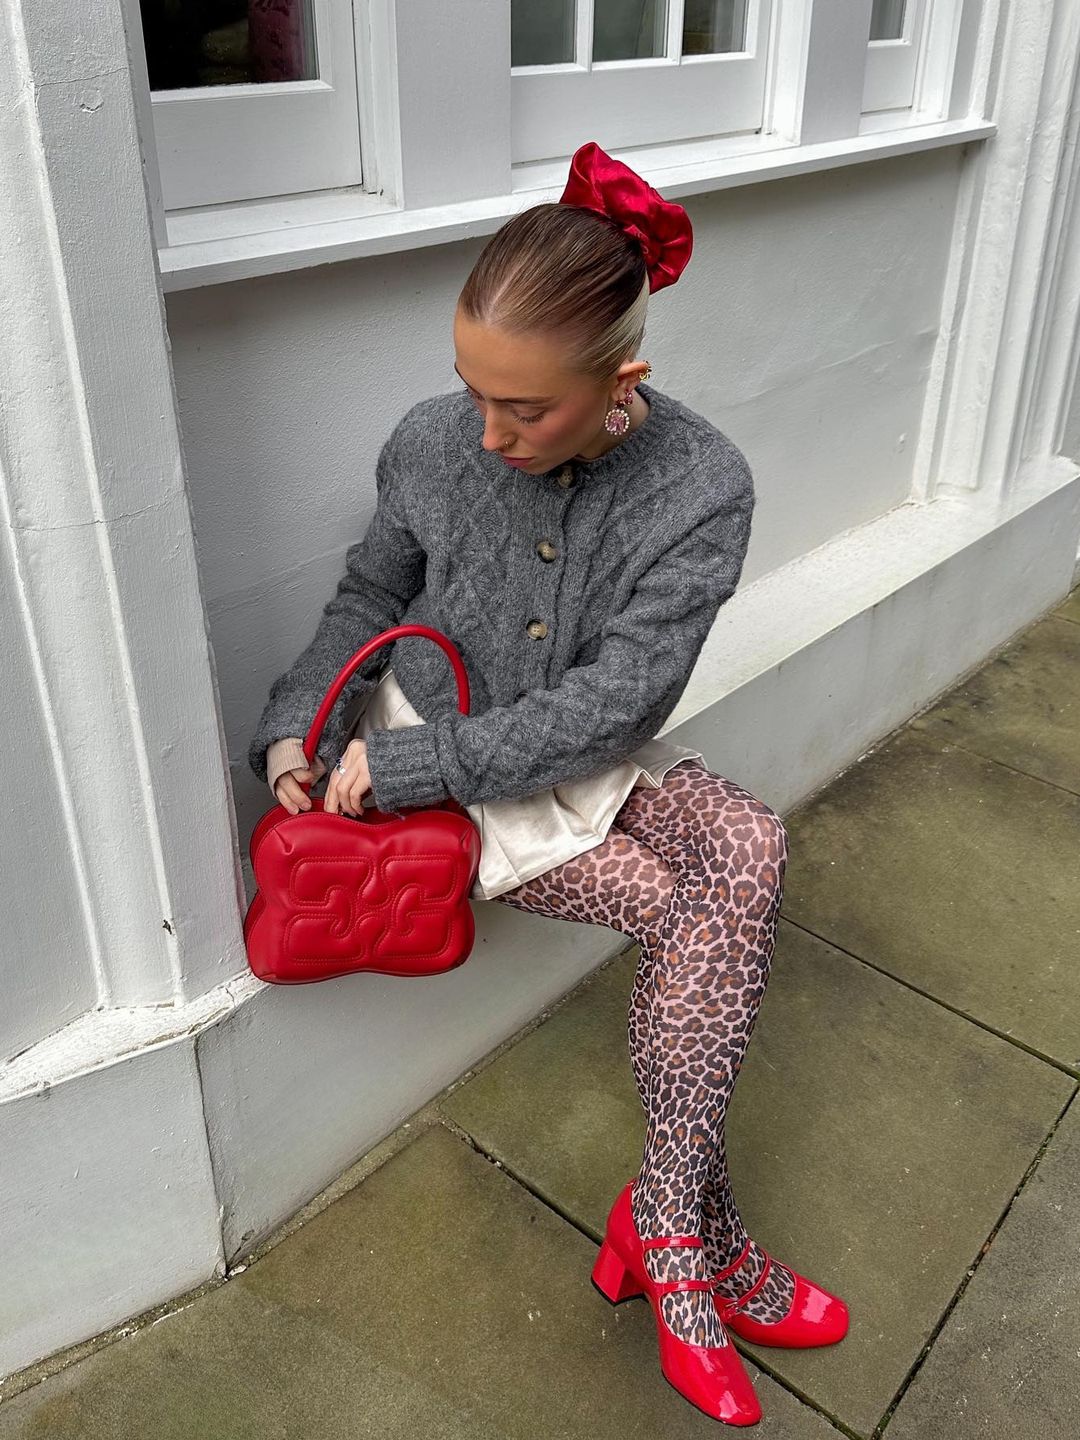 Instagram influencer @chlodavie wears leopard print tights with red shoes, a red bag and a red scrunchie